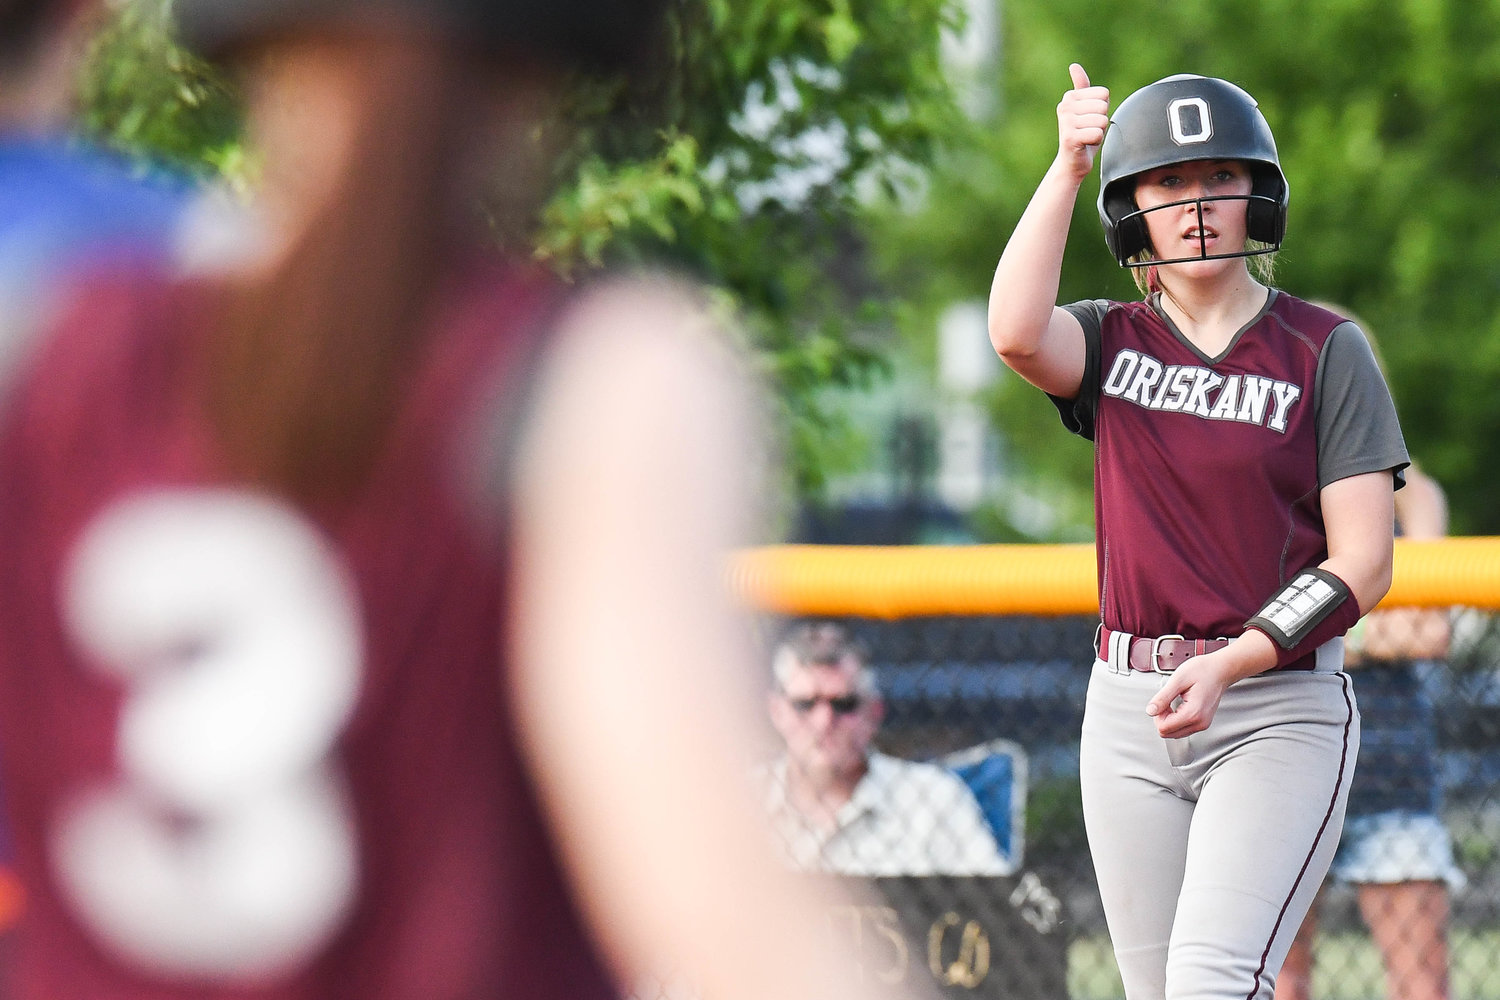 Oriskany catcher Kaelyn Buehler gives a thumbs up to a teammate from first base during the Section III Class D final against Poland on Tuesday at Carrier Park in Syracuse. Oriskany won 5-4.